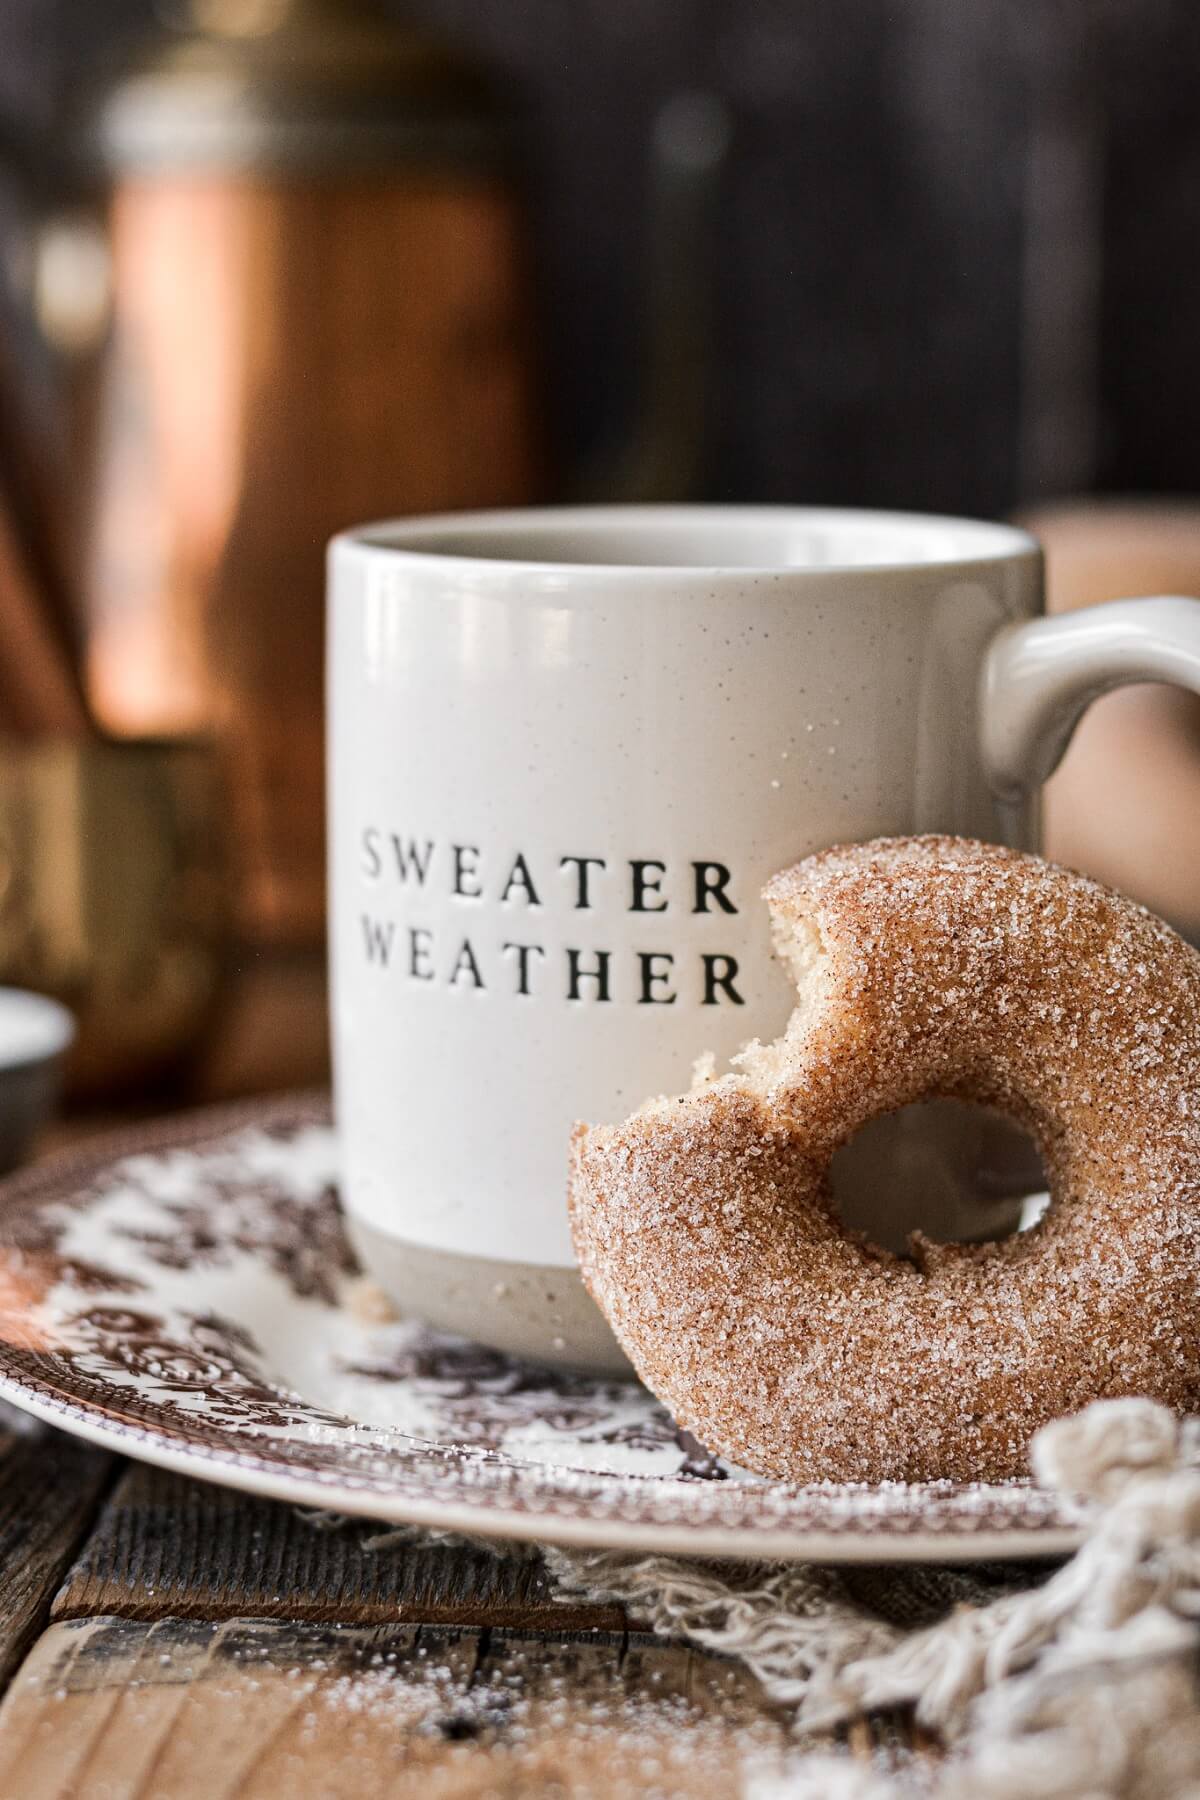 A cinnamon sugar donut next to a coffee cup that says "sweater weather".